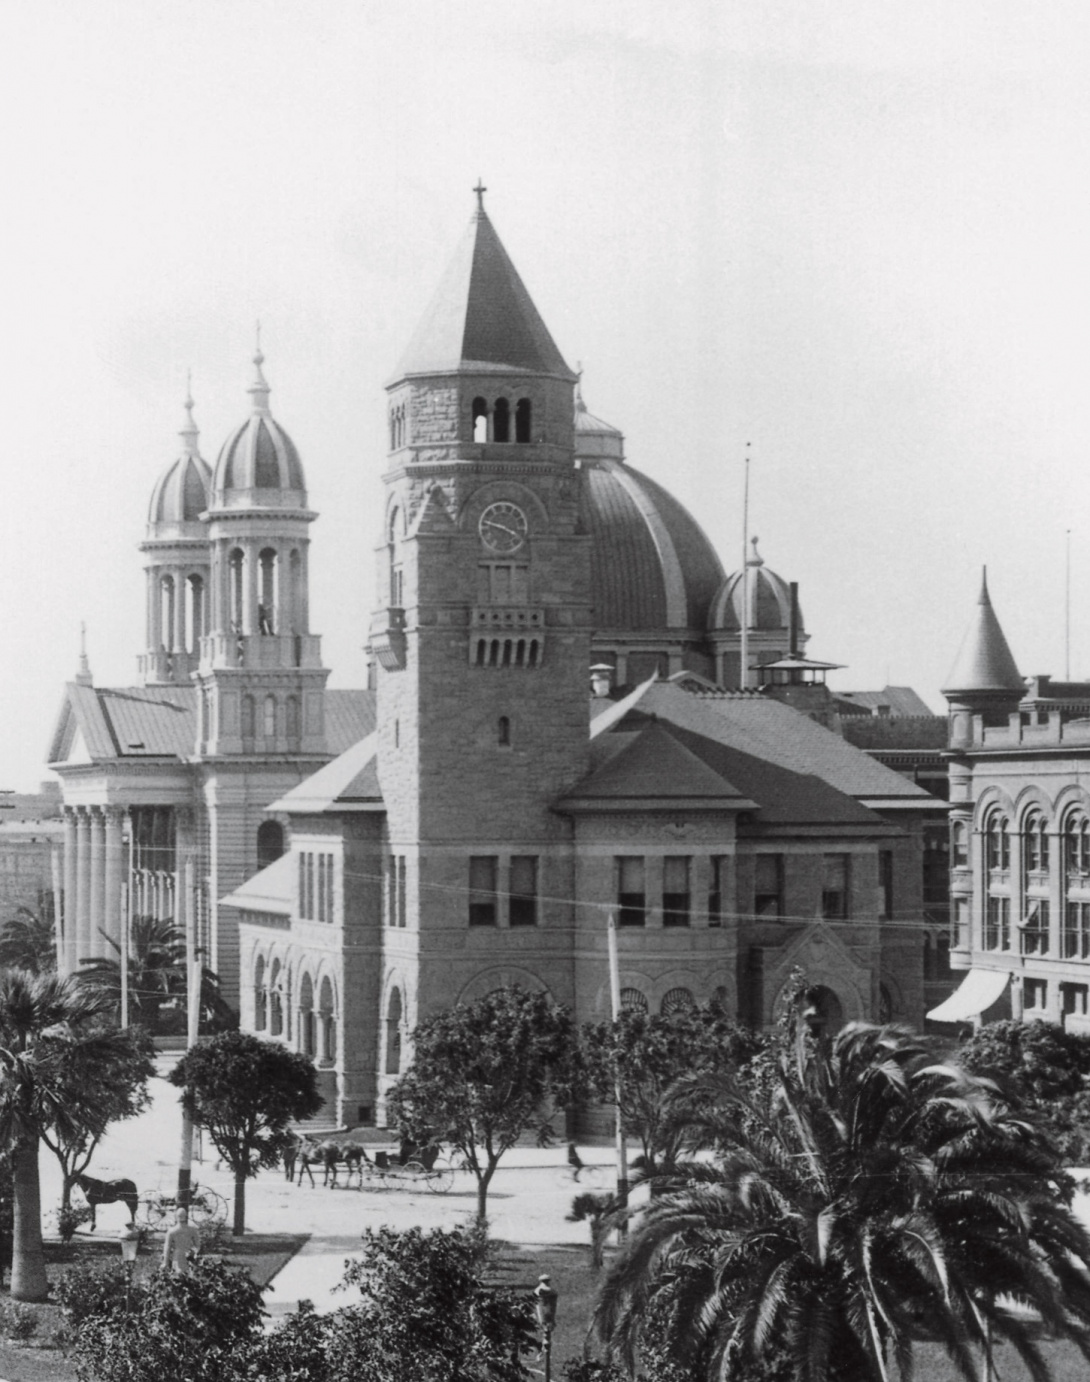 A historical black and white photograph of a brick building that was originally a post office before it became the San José Musuem of Art. There are horse-drawn carriages in the foreground. Palm trees overtake the view.